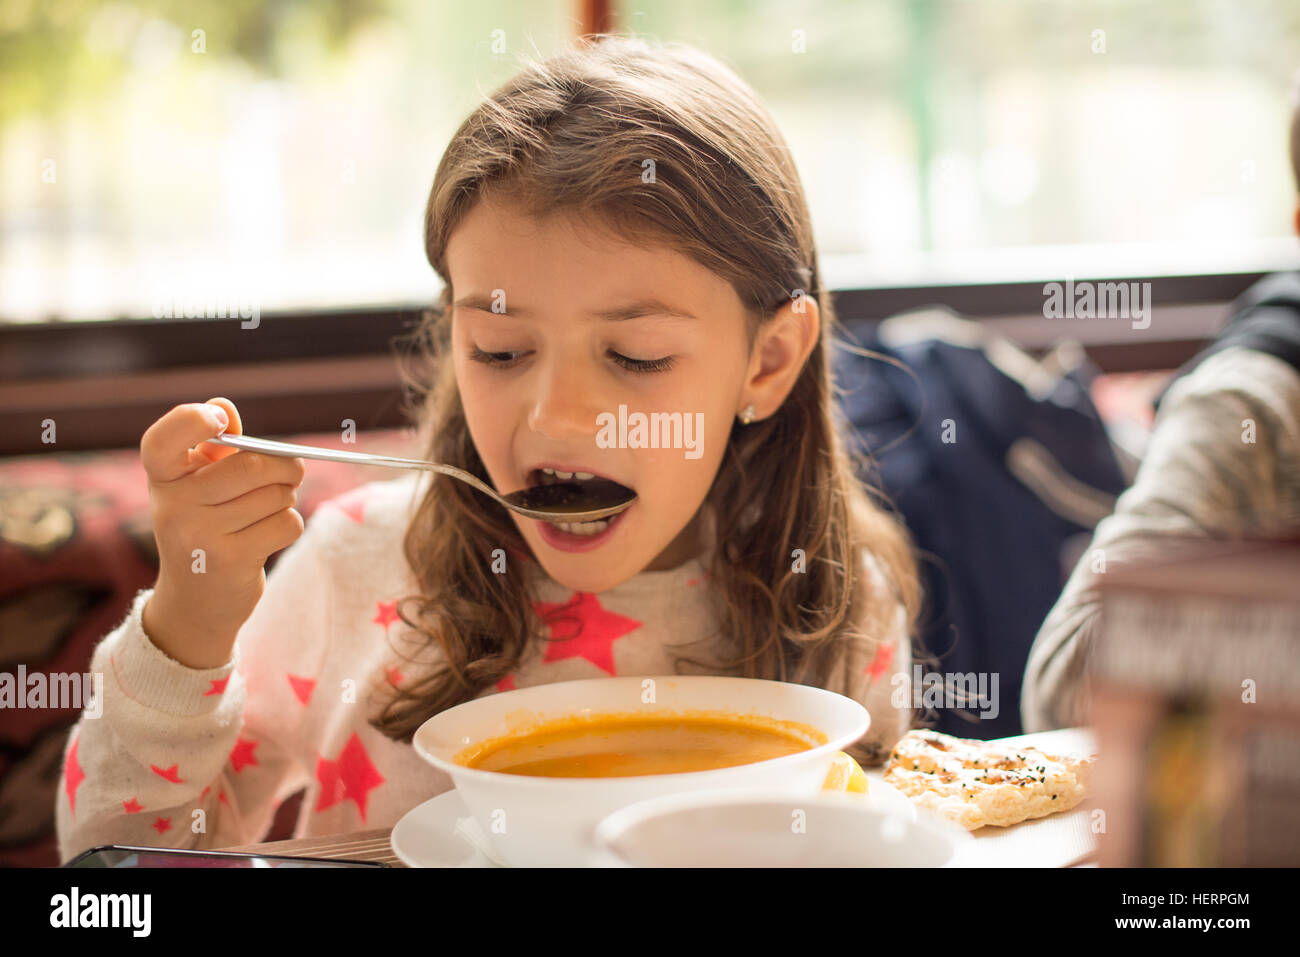 Girl eating soup while looking at her mobile phone Stock Photo